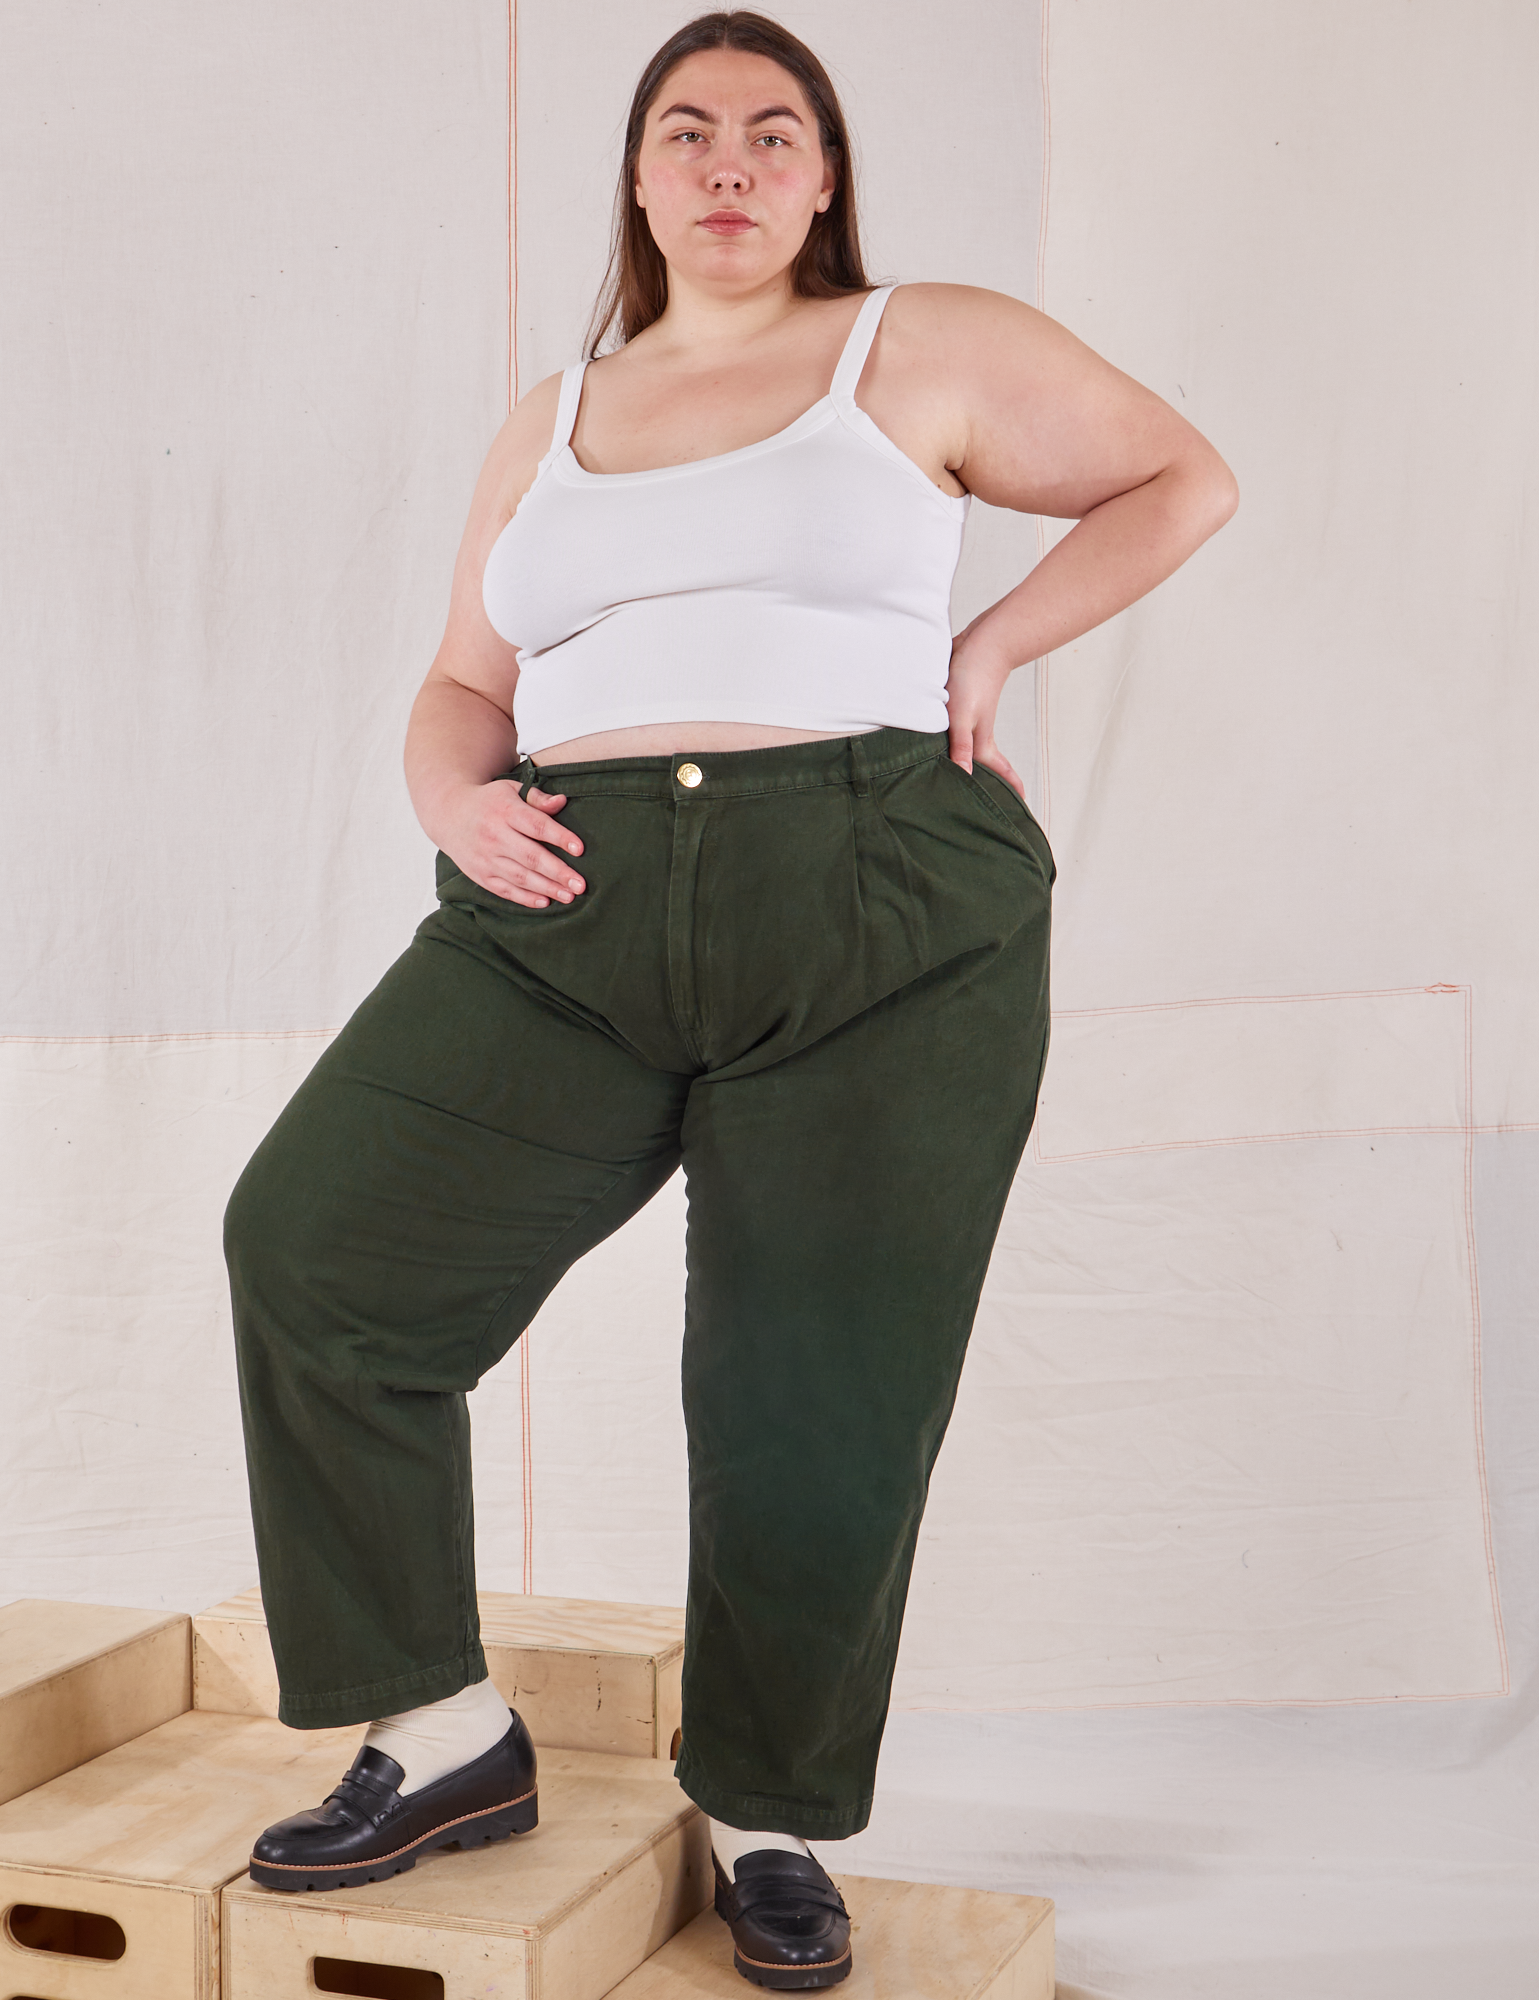 Marielena is wearing Heavyweight Trousers in Swamp Green and vintage tee off-white Cami